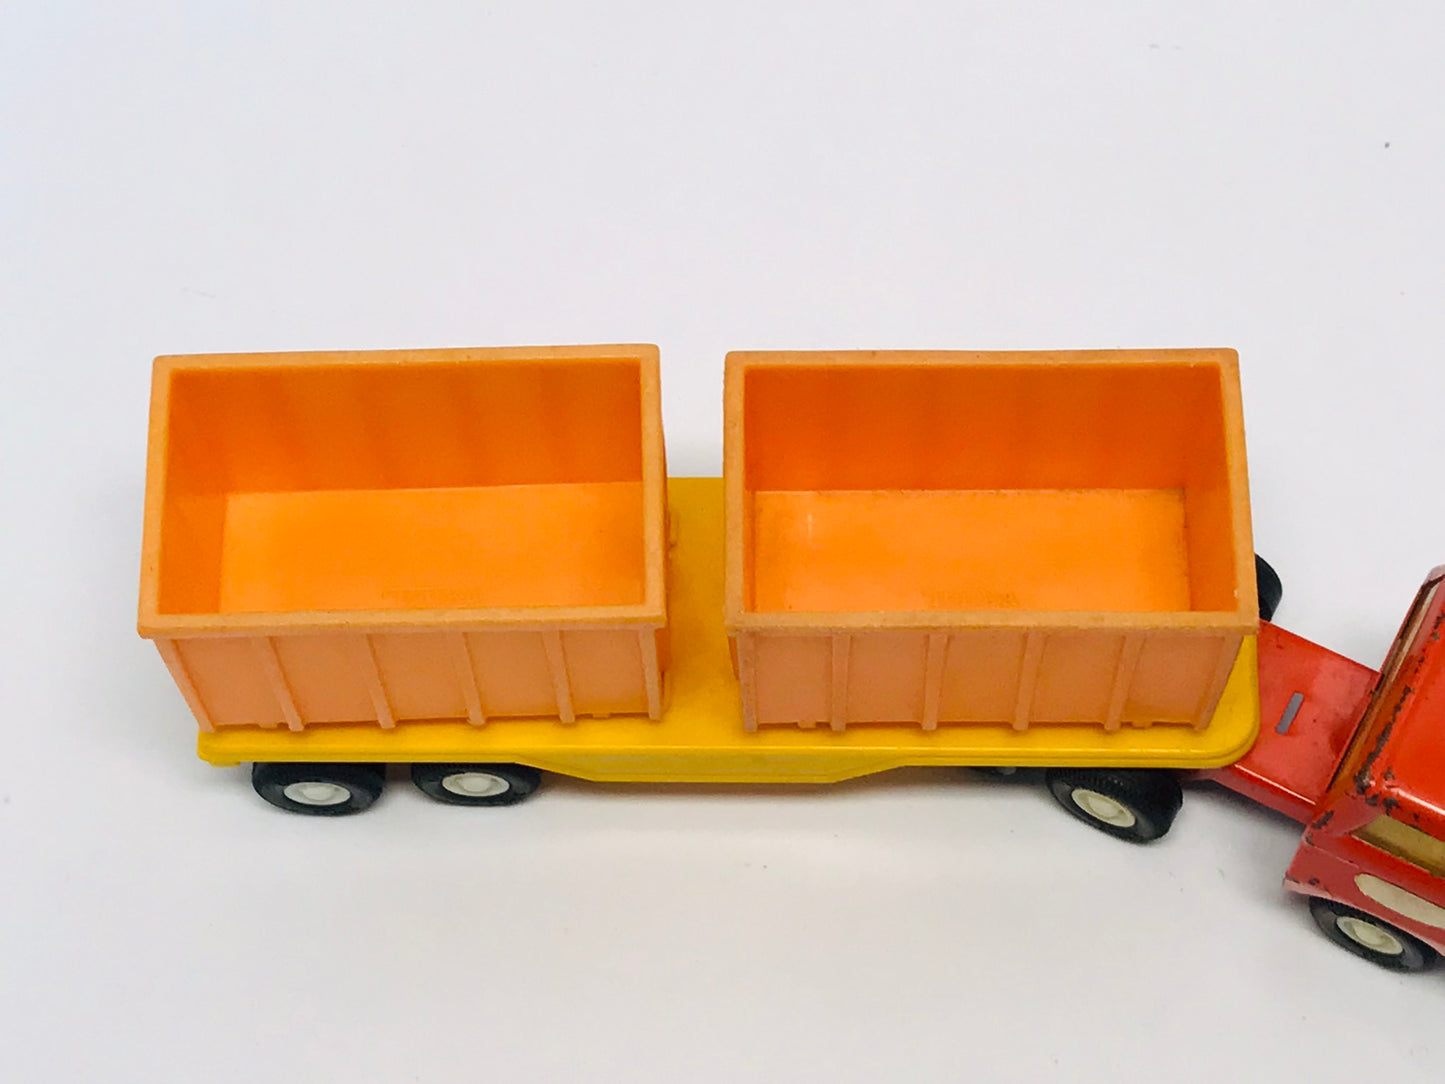 Vintage 1970's 10 Inch Tonka Metal Plastic Semi Truck With Trailer, Boxes Red Yellow Orange